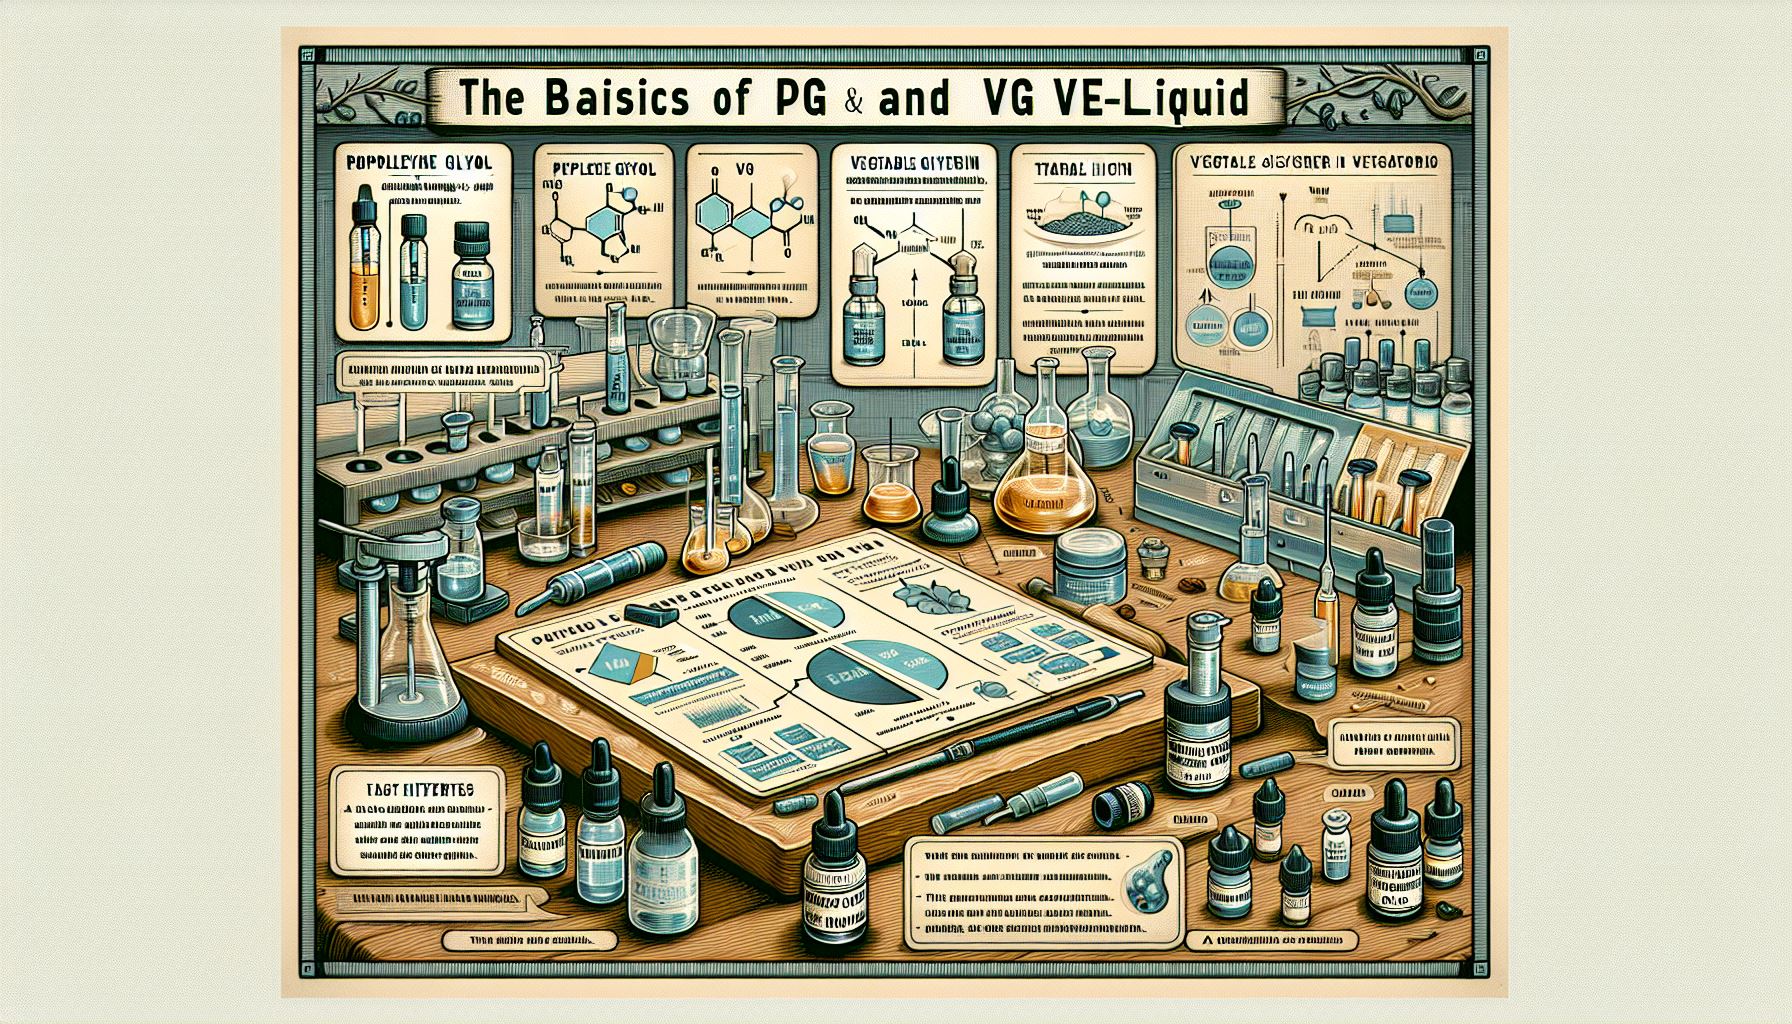 An educational illustration visualizing the principles of Propylene Glycol (PG) and Vegetable Glycerin (VG) types of e-liquids. The image should contain labeled diagrams explaining the composition of 